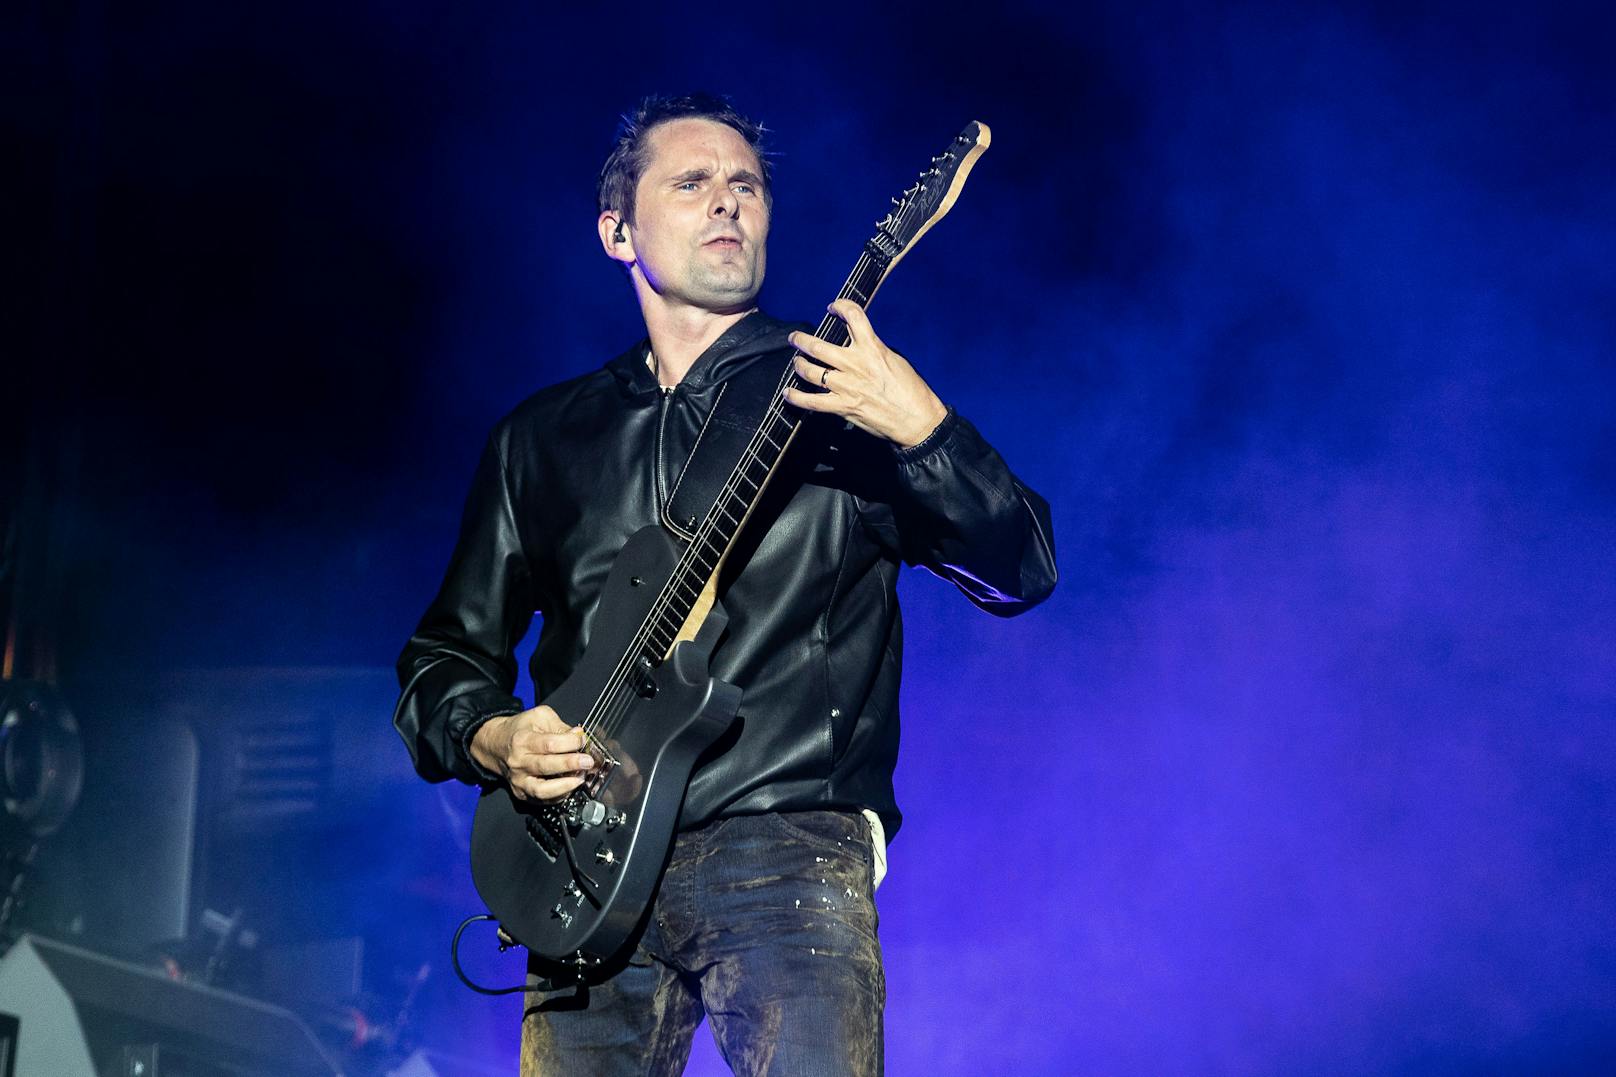 Muse live on Stage!